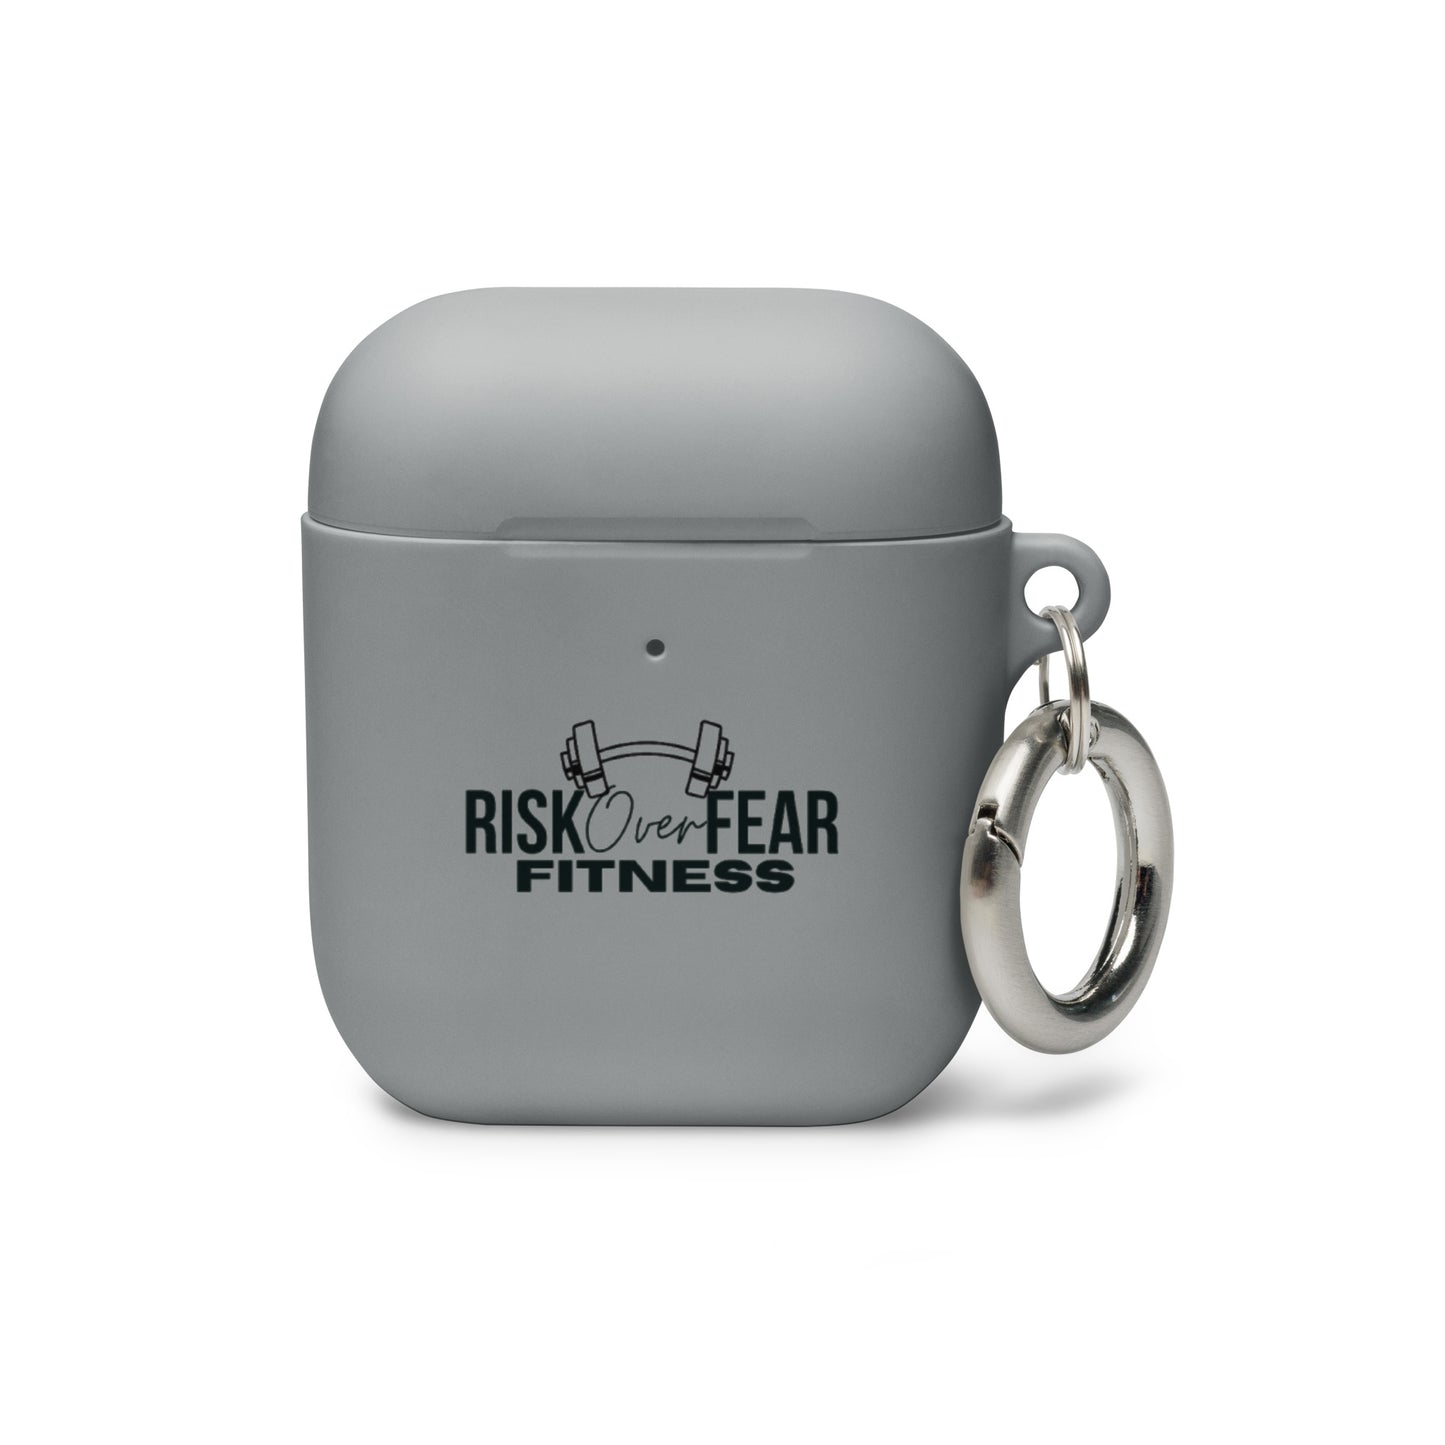 Risk over Fear AirPods case